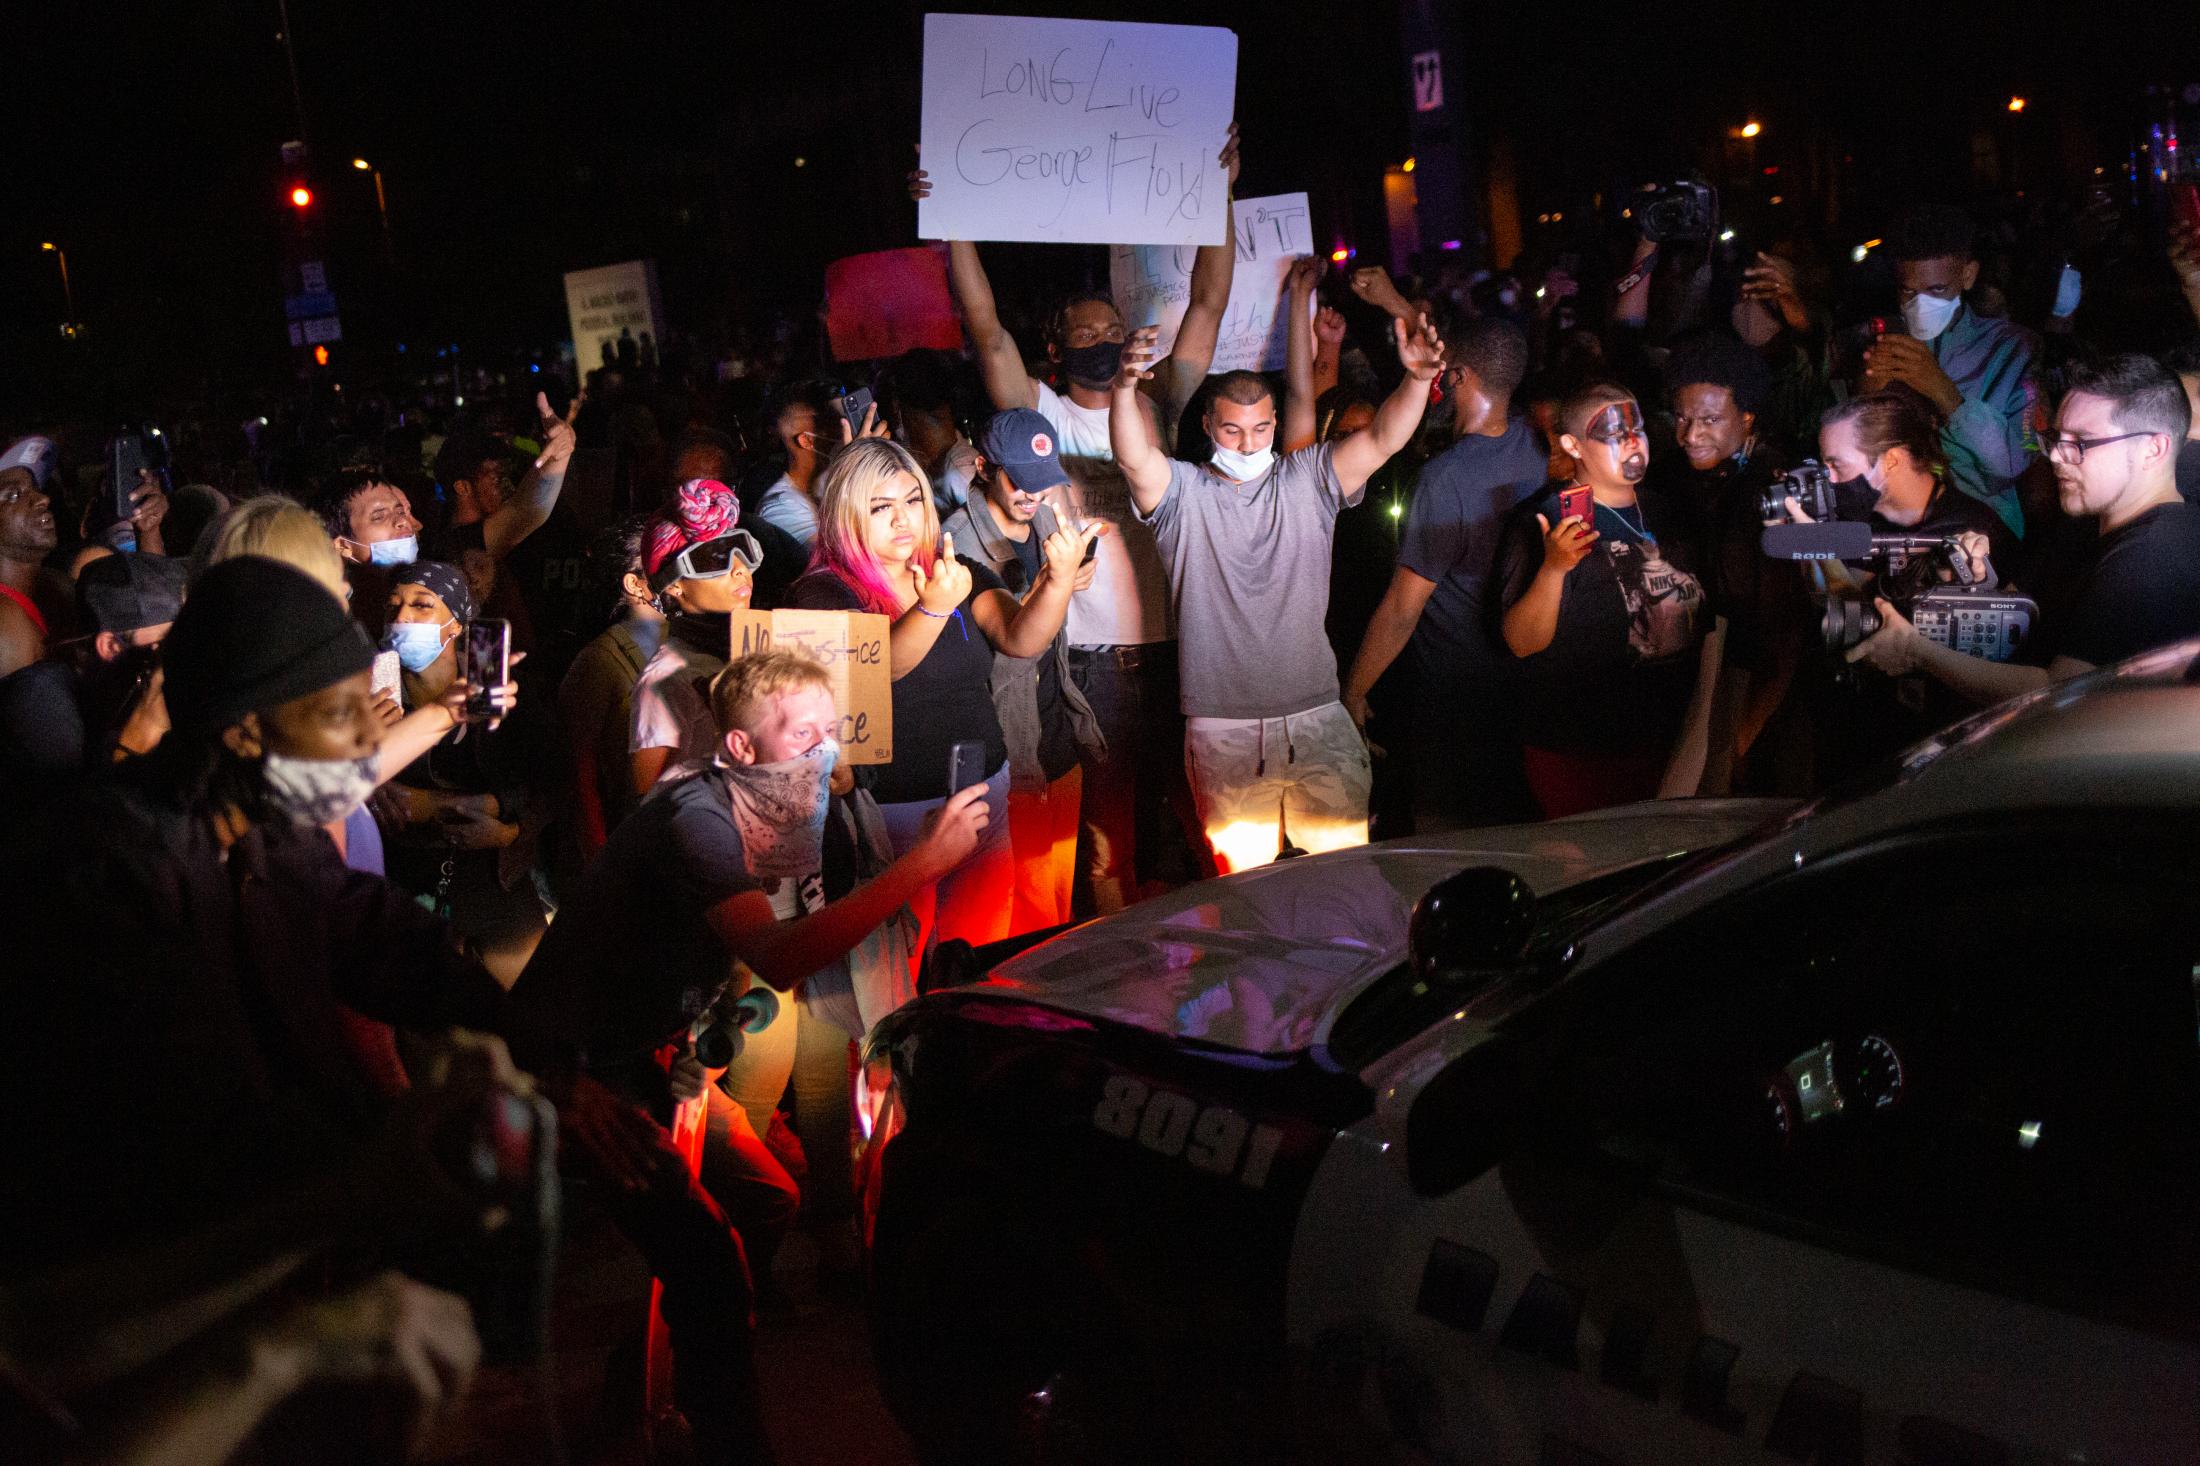 No Justice No Peace - A crowd storms around a police cruiser with signs and...